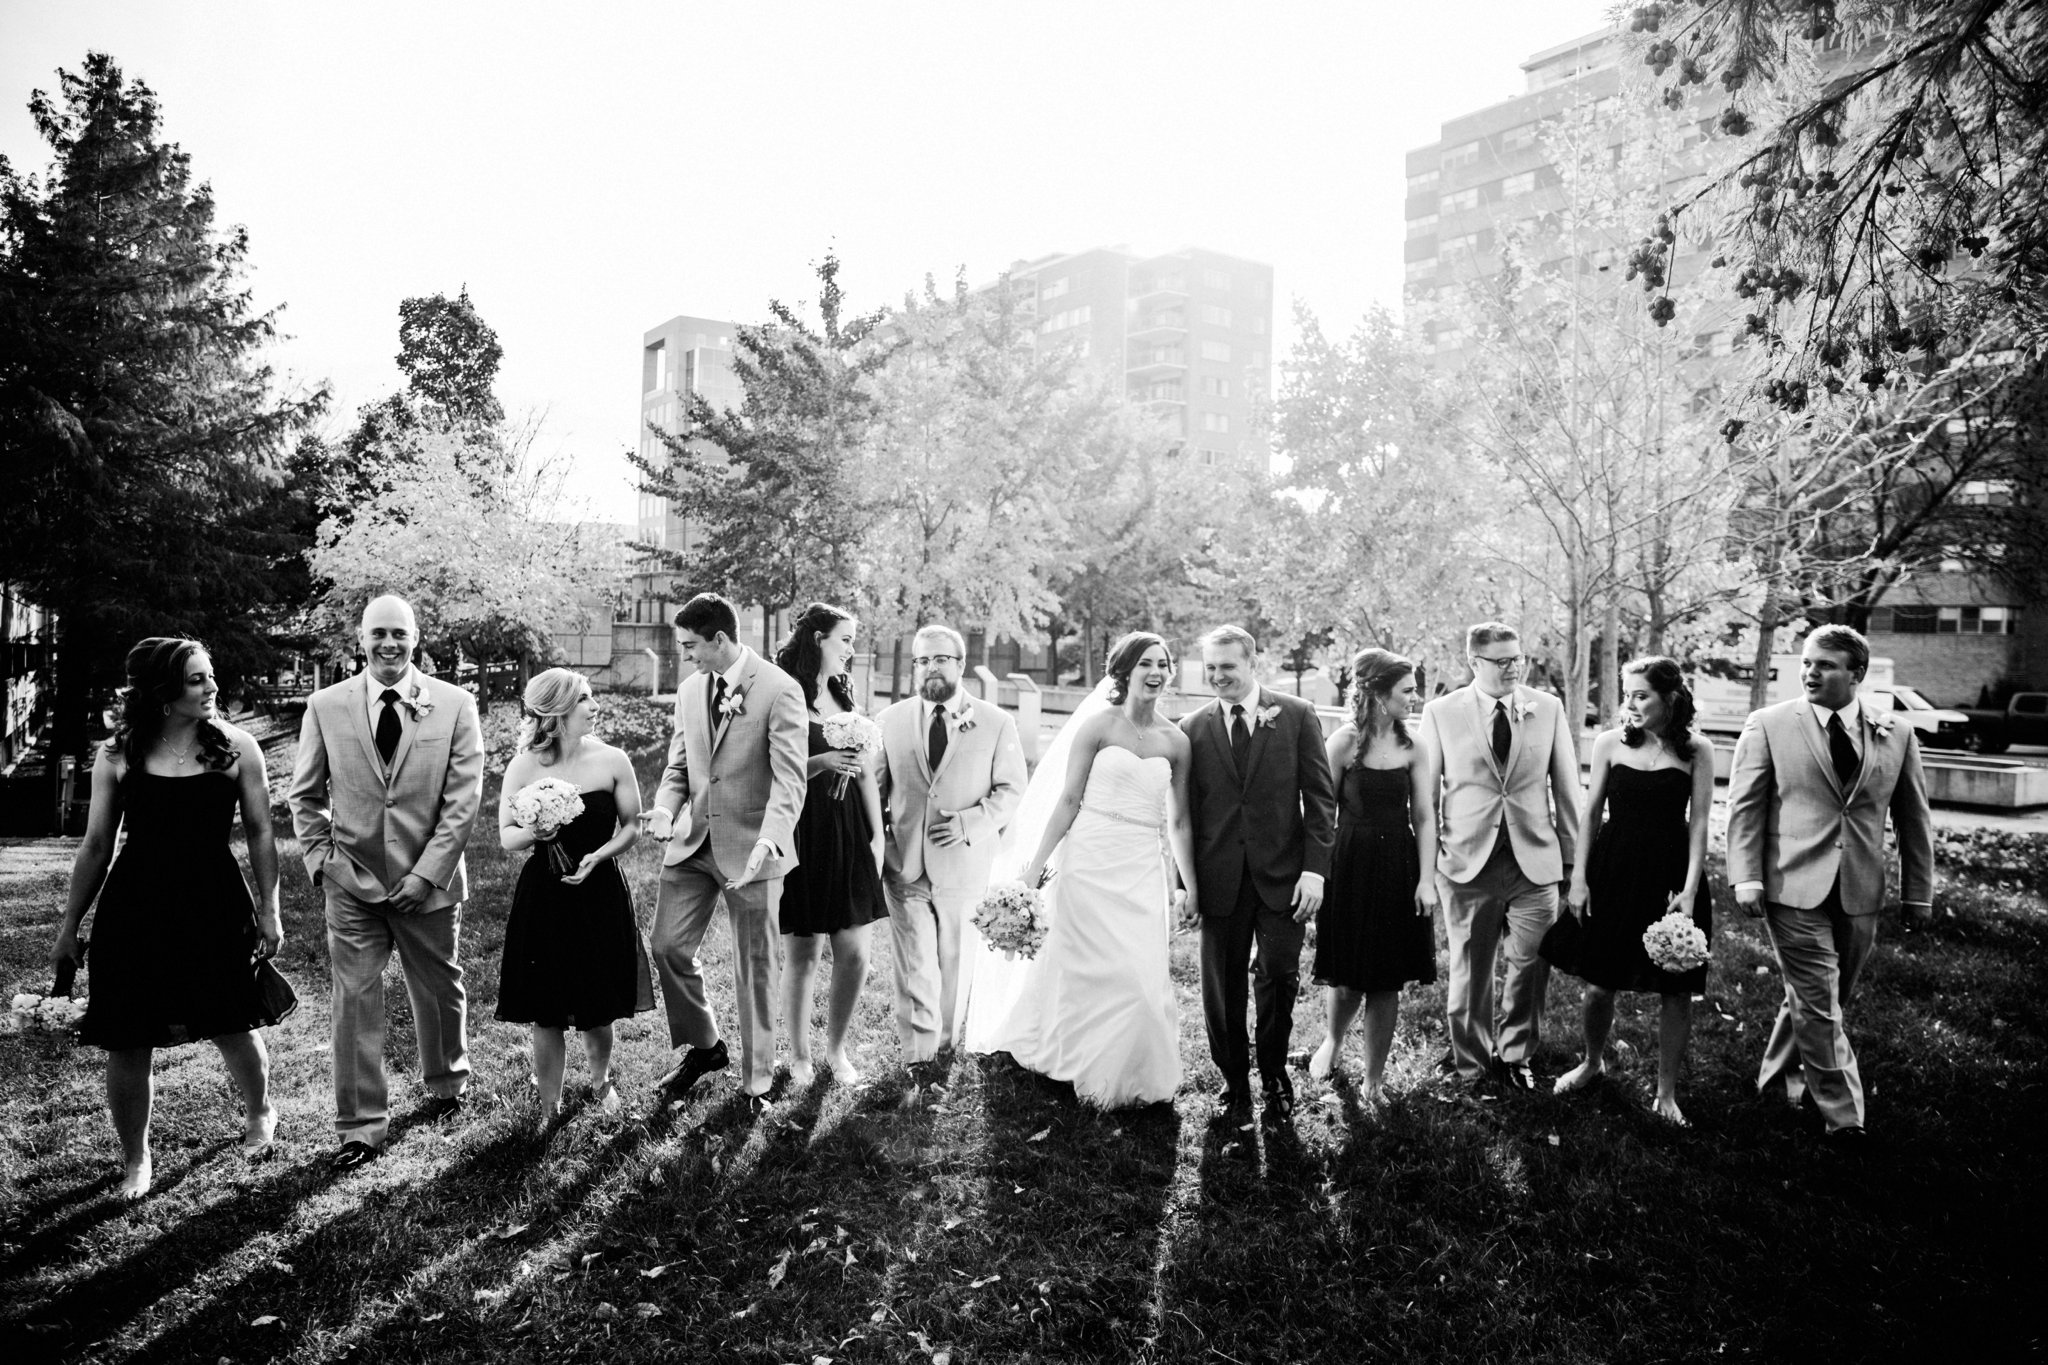 black and white | wedding | wedding photos | wedding photography | images by feliciathephotographer.com | Country Club Plaza | Kansas City | Unity Temple | Cancer Survivor Park | bridal party portraits | navy bridesmaid dresses | walking in the park | candid 